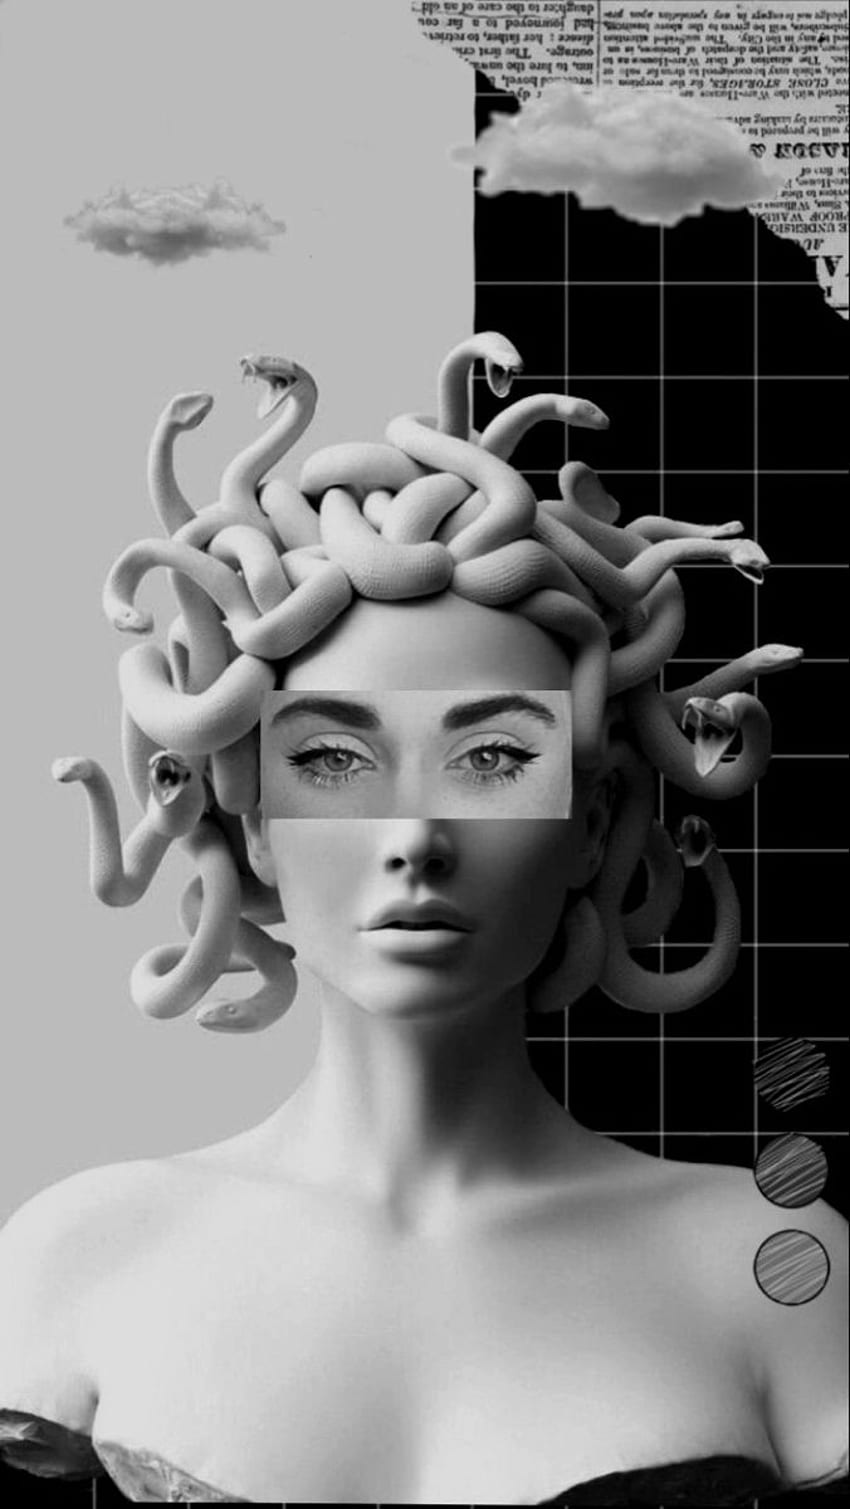 Black and white digital collage of a woman with snakes in her hair - Medusa